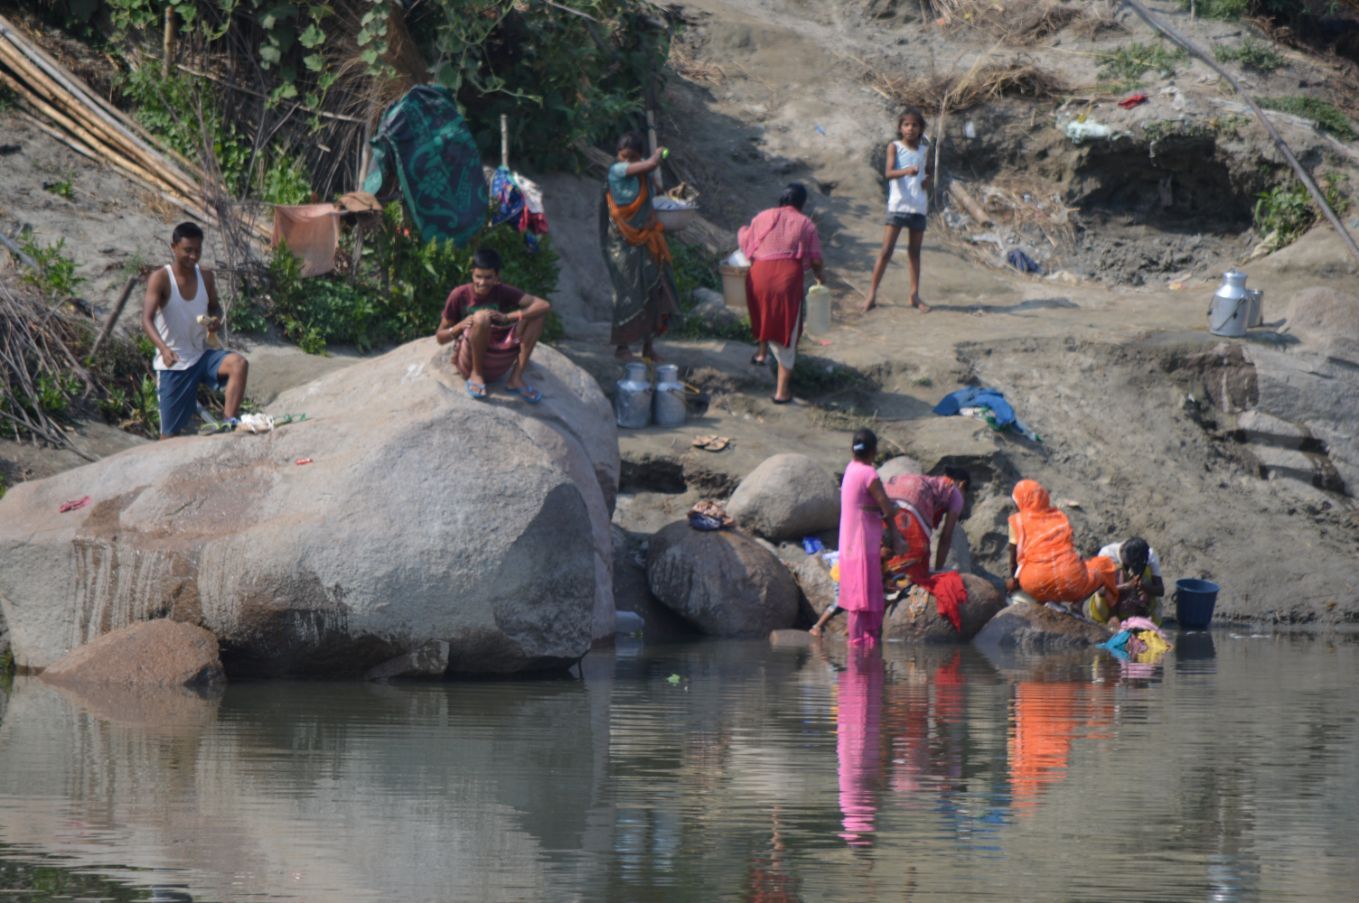 Villagers collecting water and bathing in the Brahmaputra